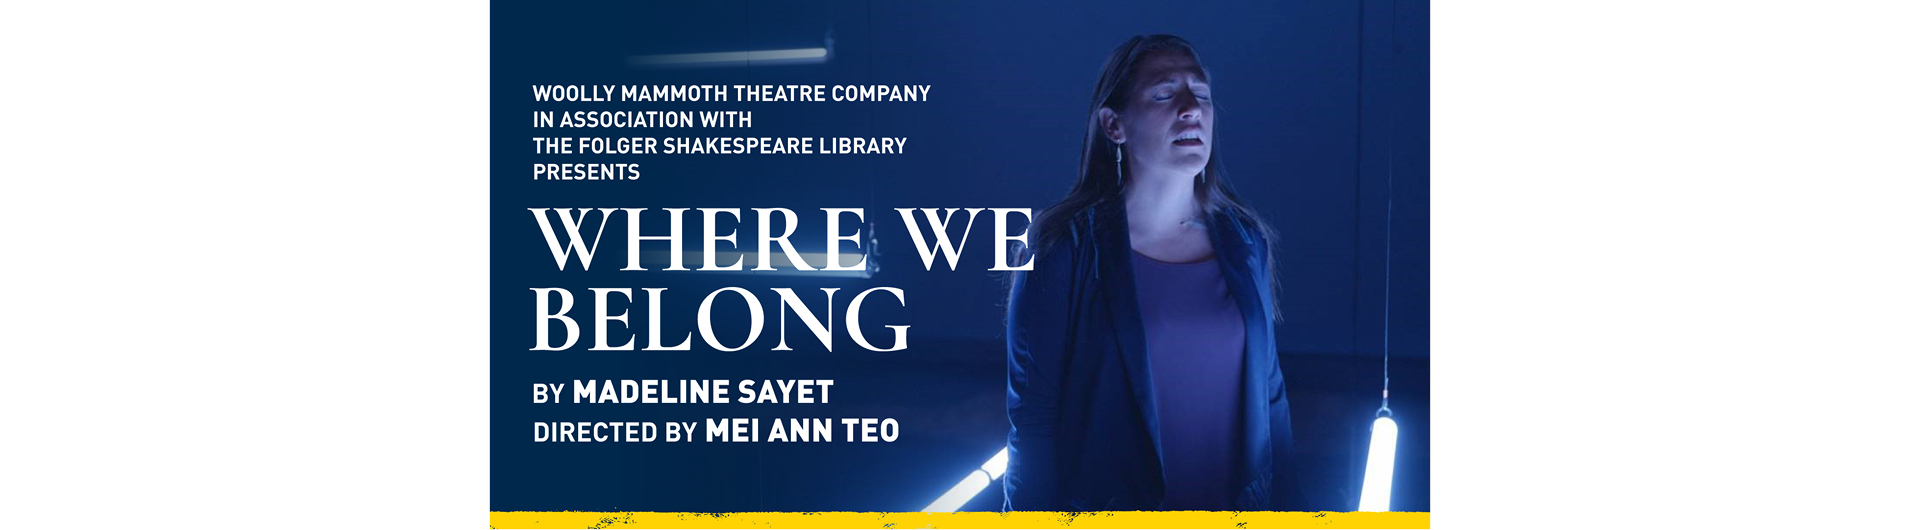 The Woolly Mammoth Theatre Company Production of WHERE WE BELONG